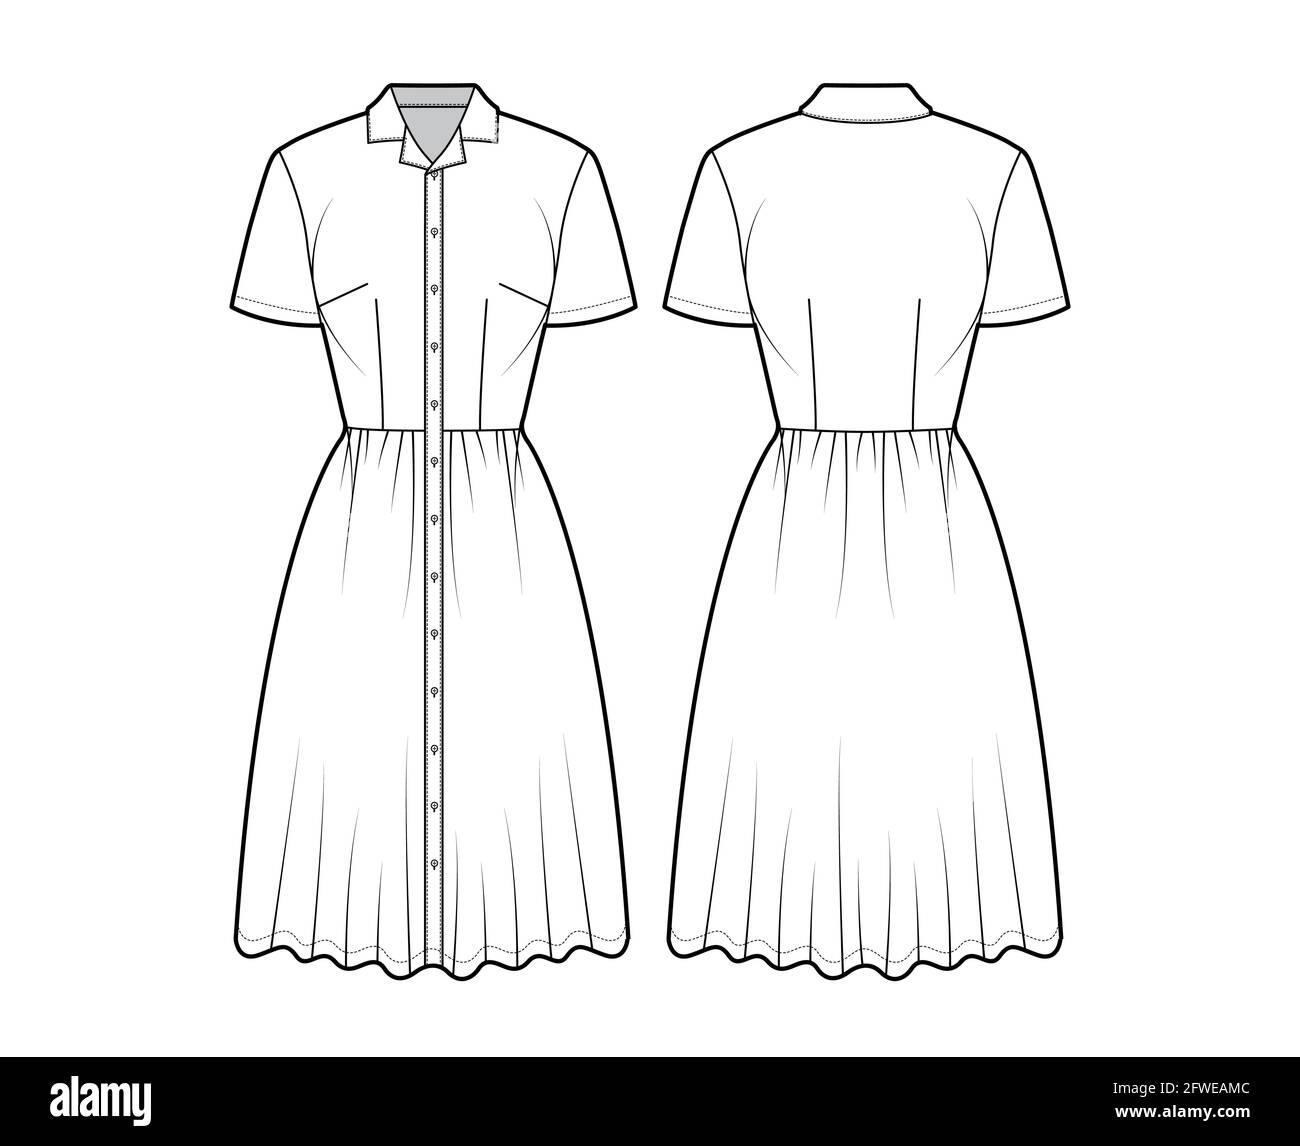 Shirt dress technical fashion illustration with classic collar knee  length fitted body Pencil fullness button up Flat apparel template  front white color Women men unisex CAD mockup Stock Vector Image  Art 